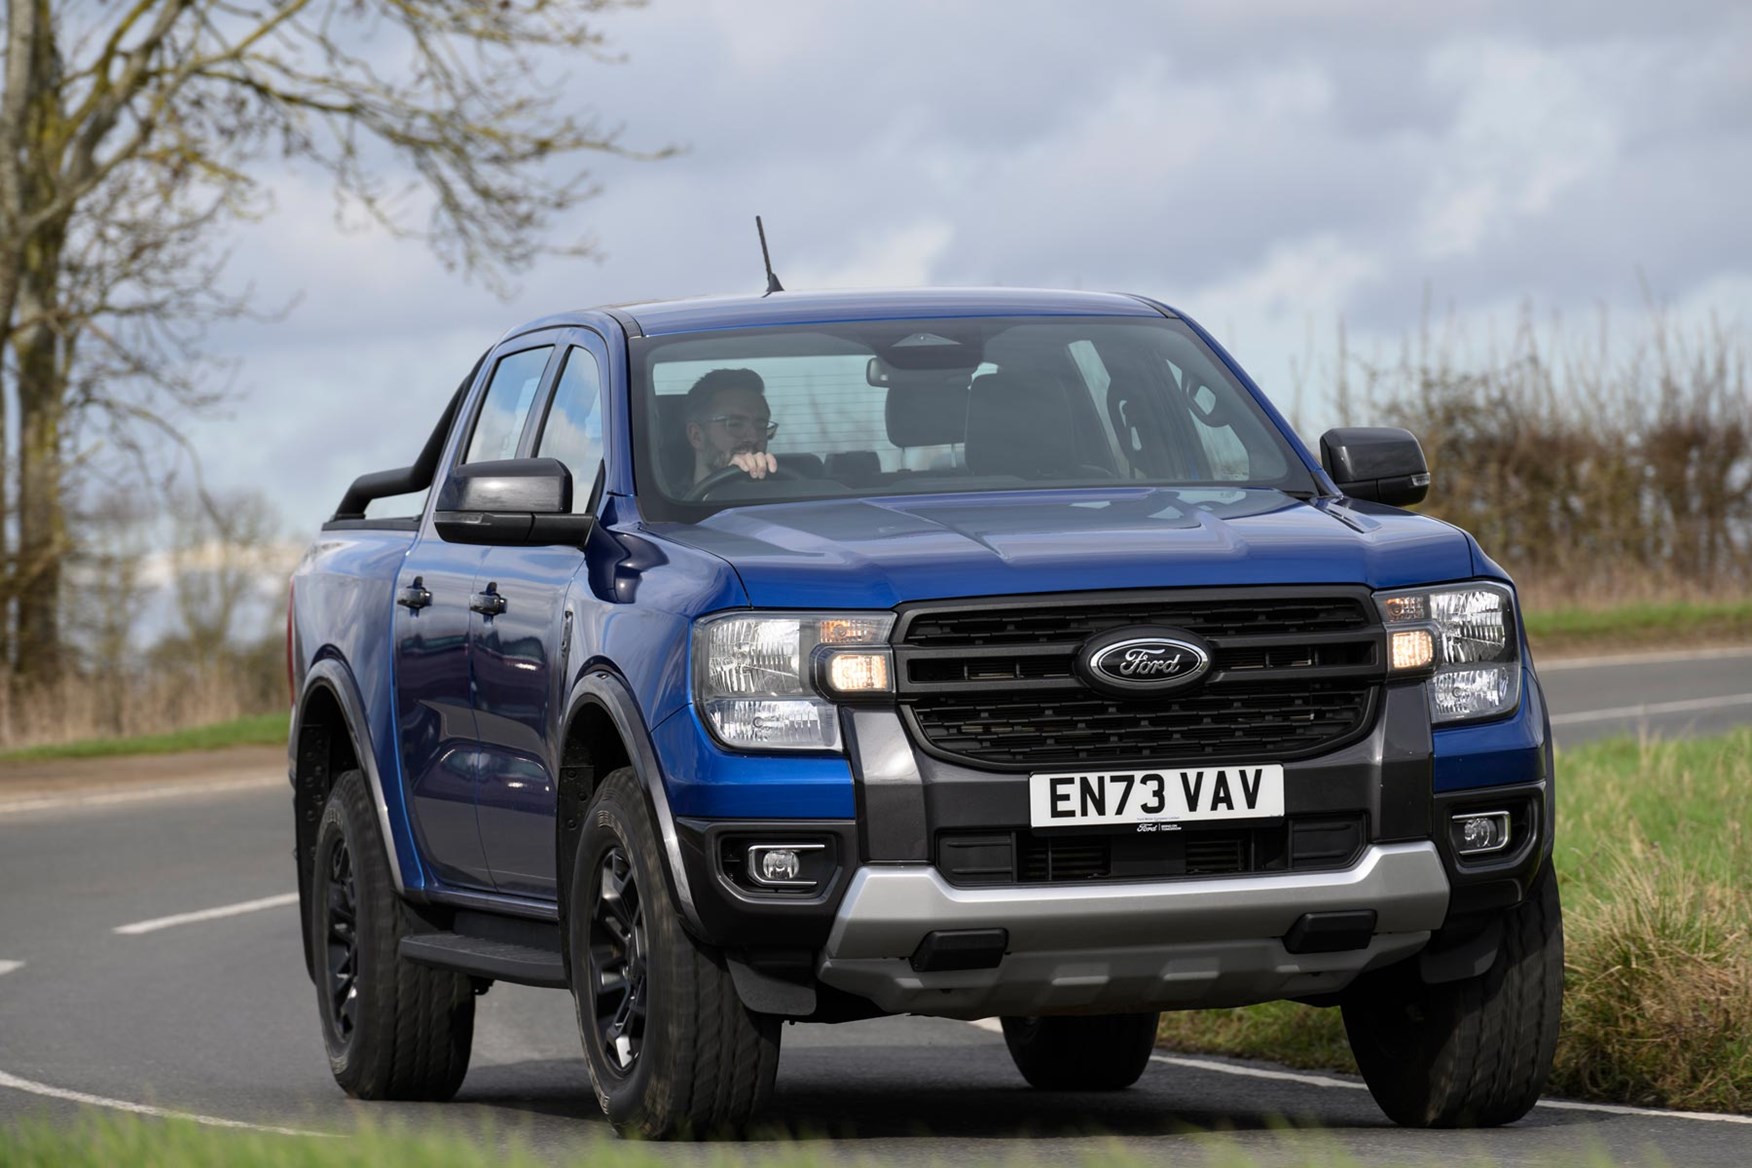 The Tremor is one of eight trims in the Ford Ranger line up.